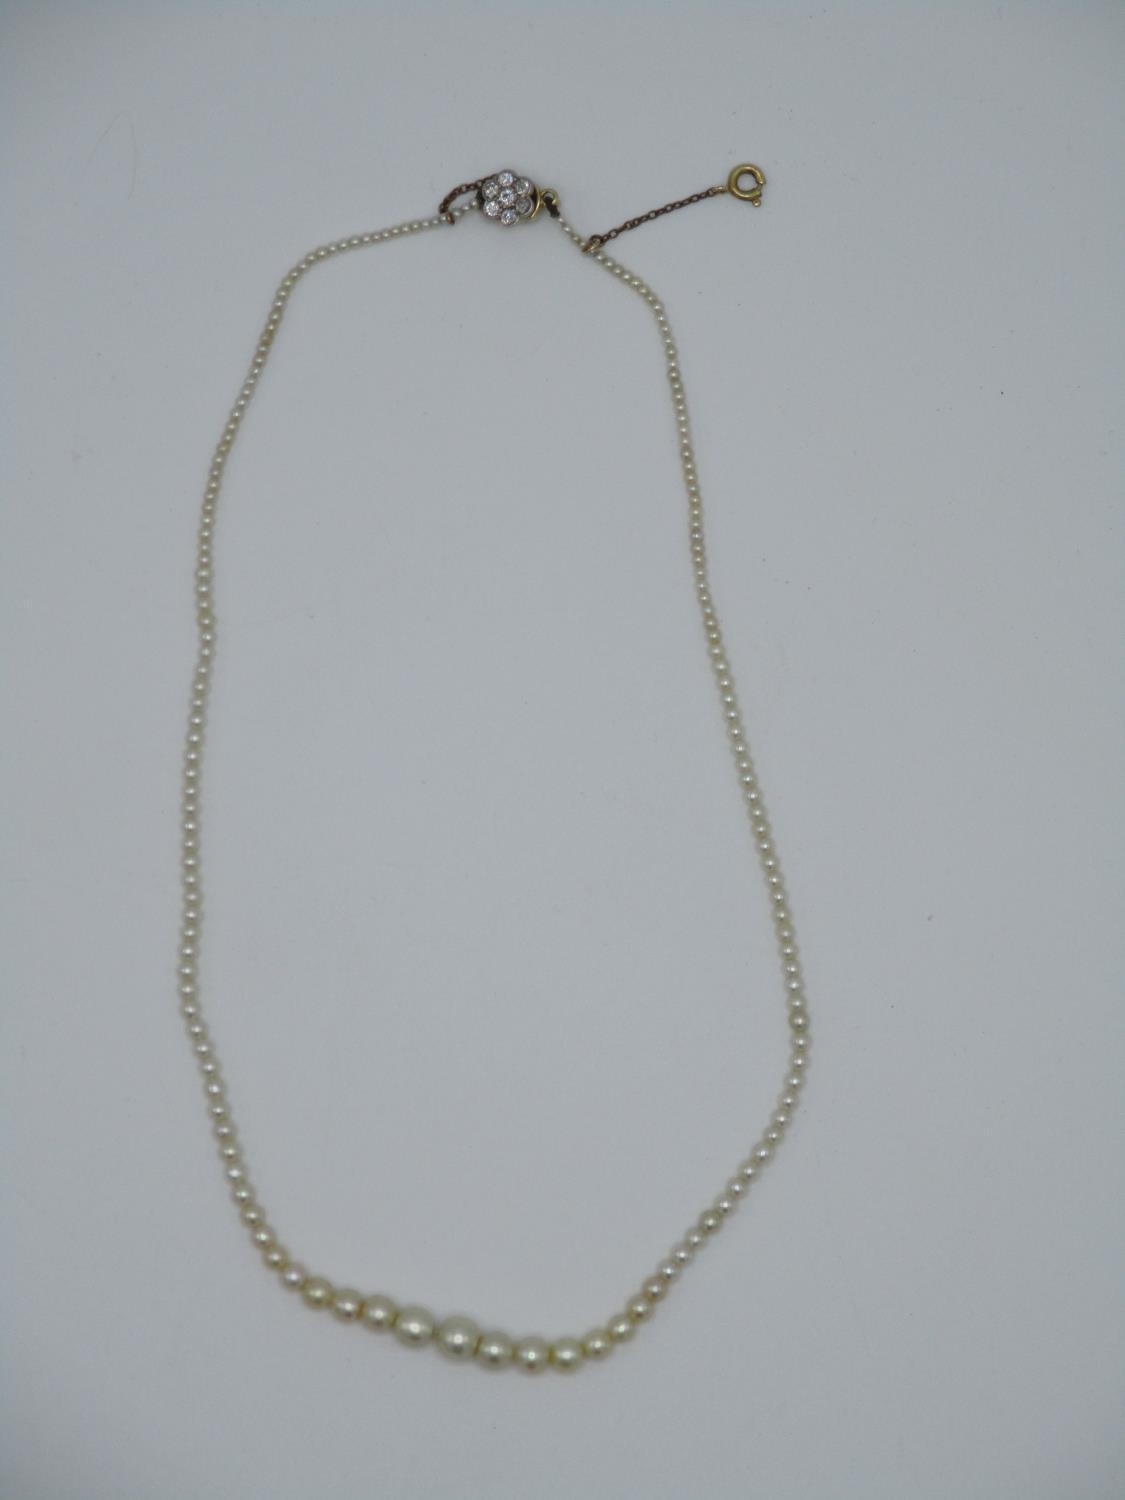 A natural pearl necklace with a gold clasp set with diamonds - Image 2 of 6